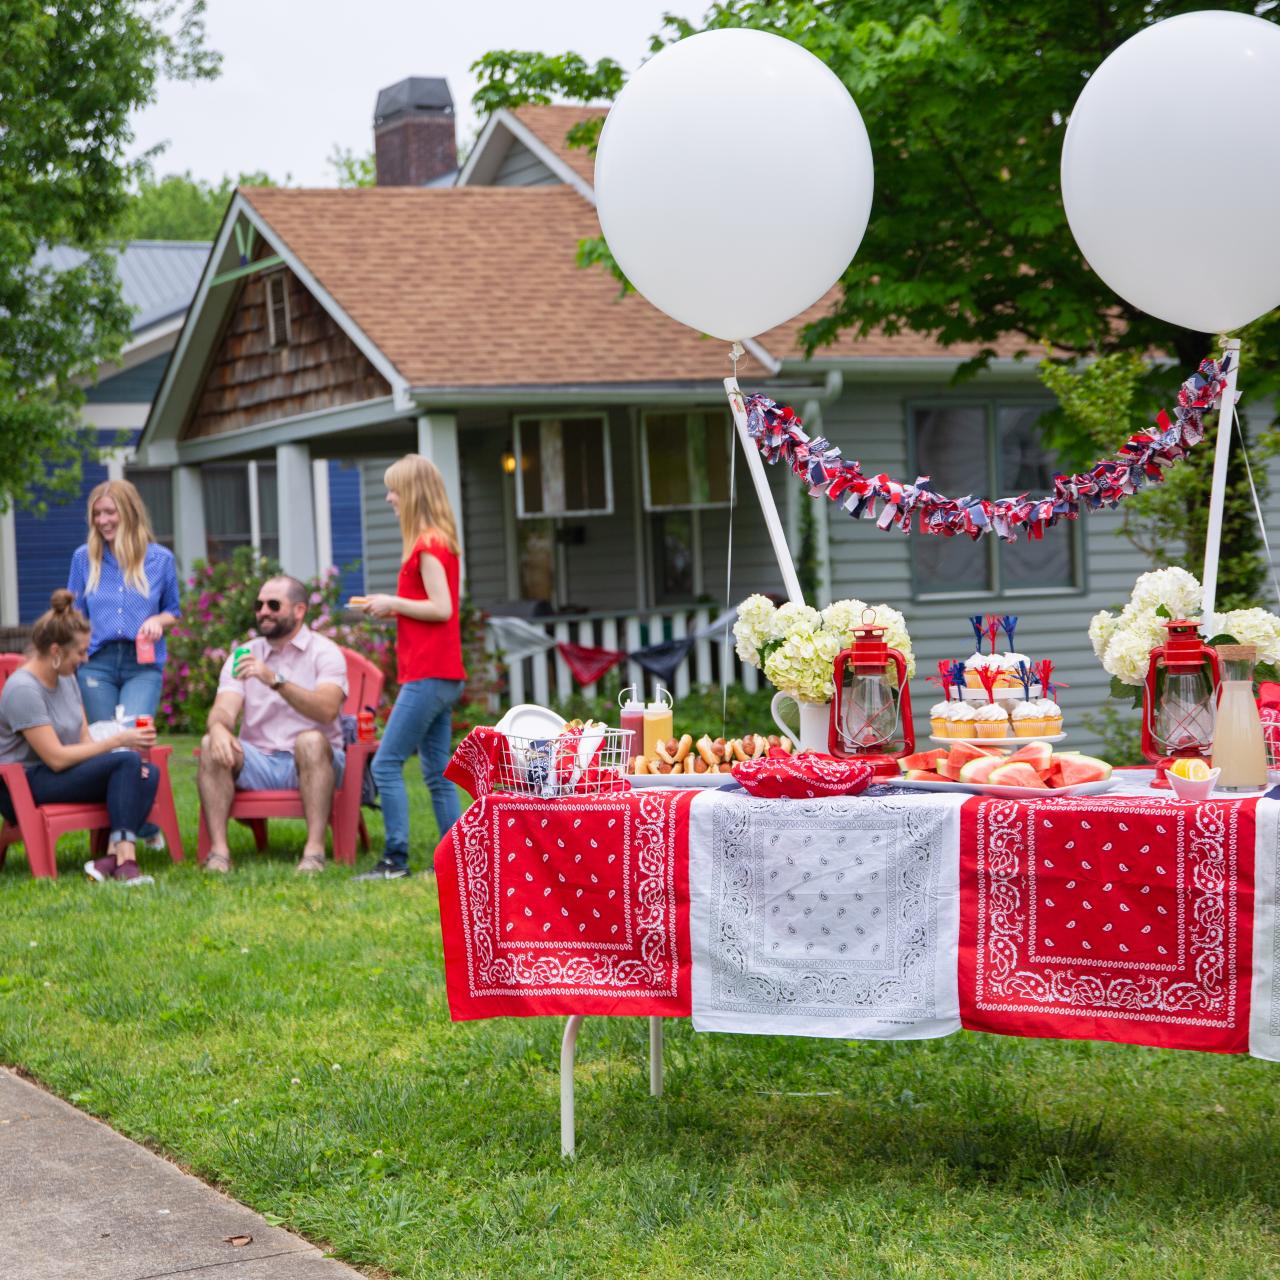 How to Throw a Patriotic Party on a Budget